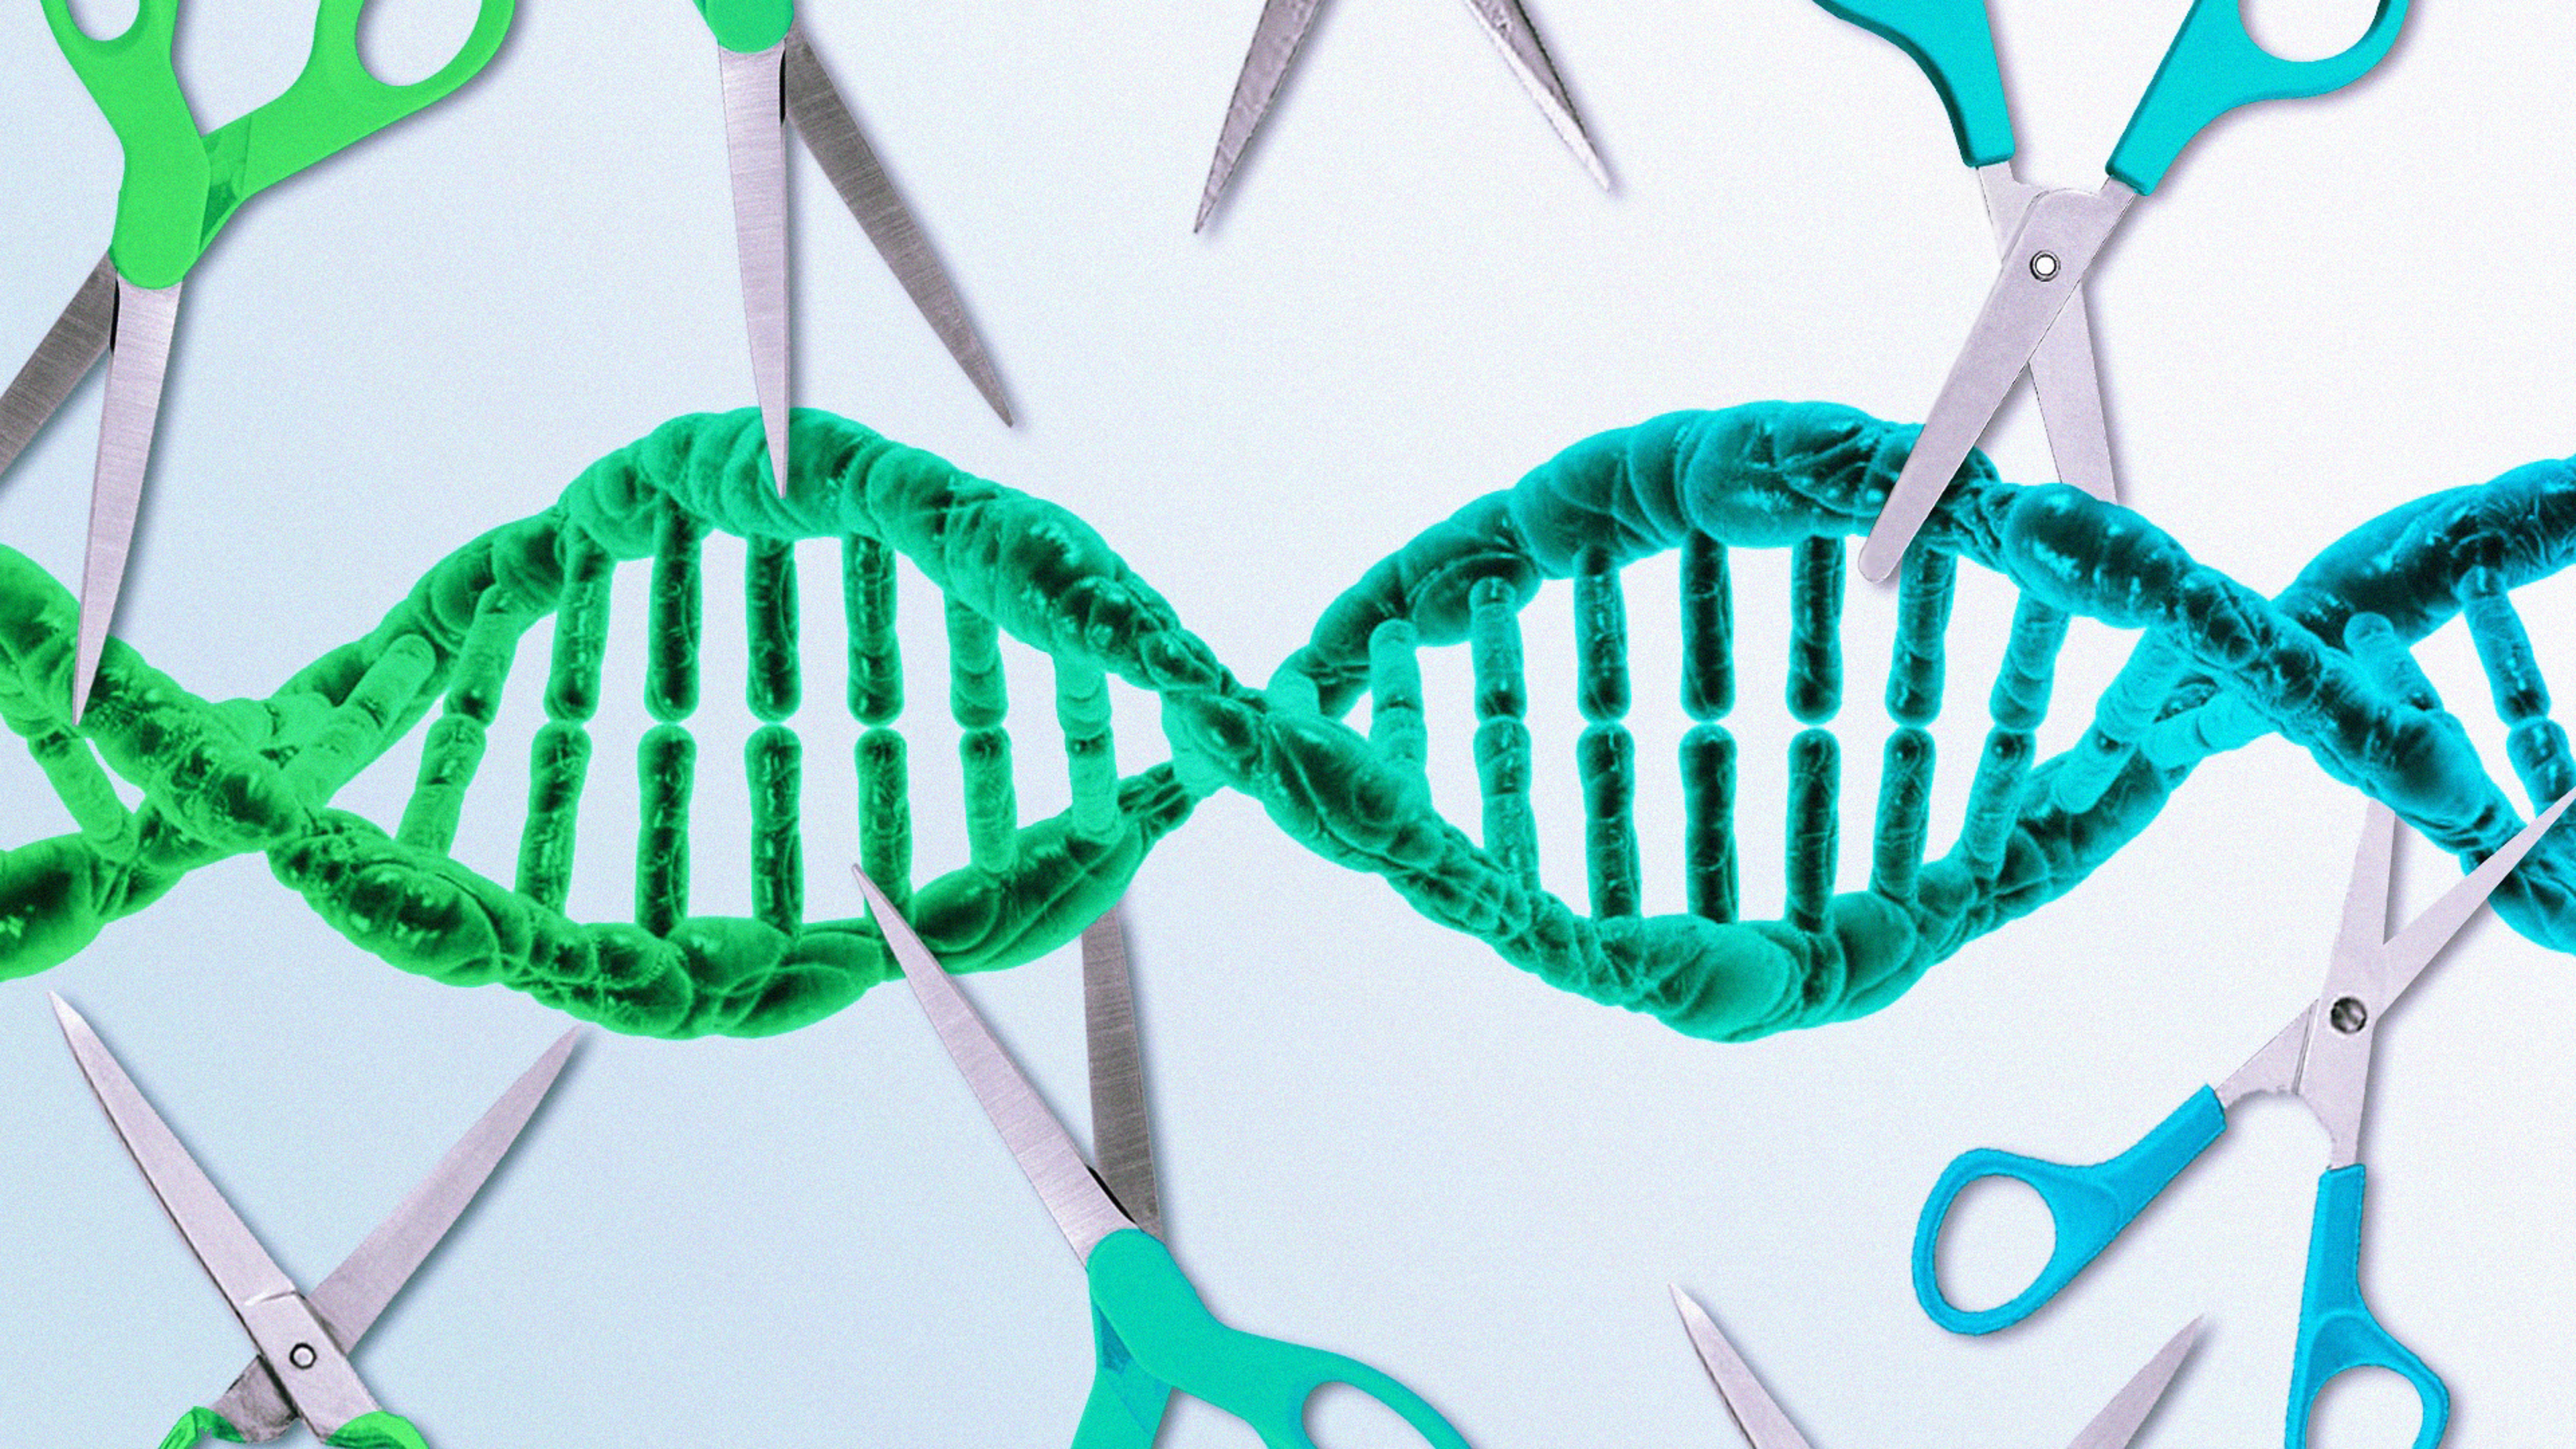 Alternatives to CRISPR-Cas9: Nucleases for Next-Gen Therapy